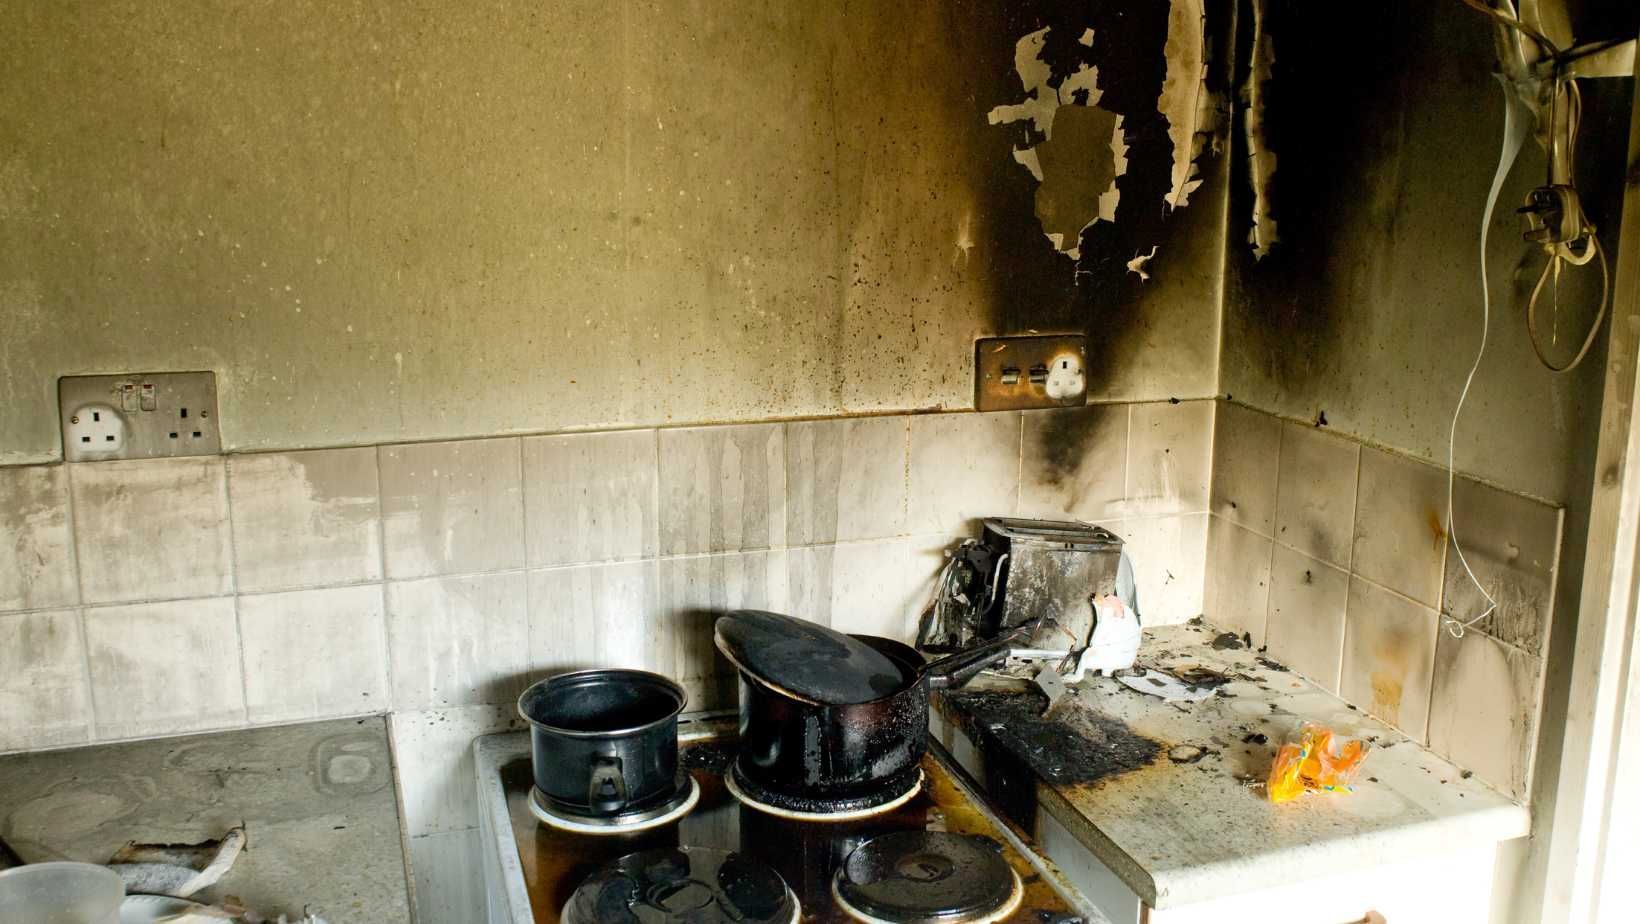 Key Fire Prevention Tips for Louisiana Homes